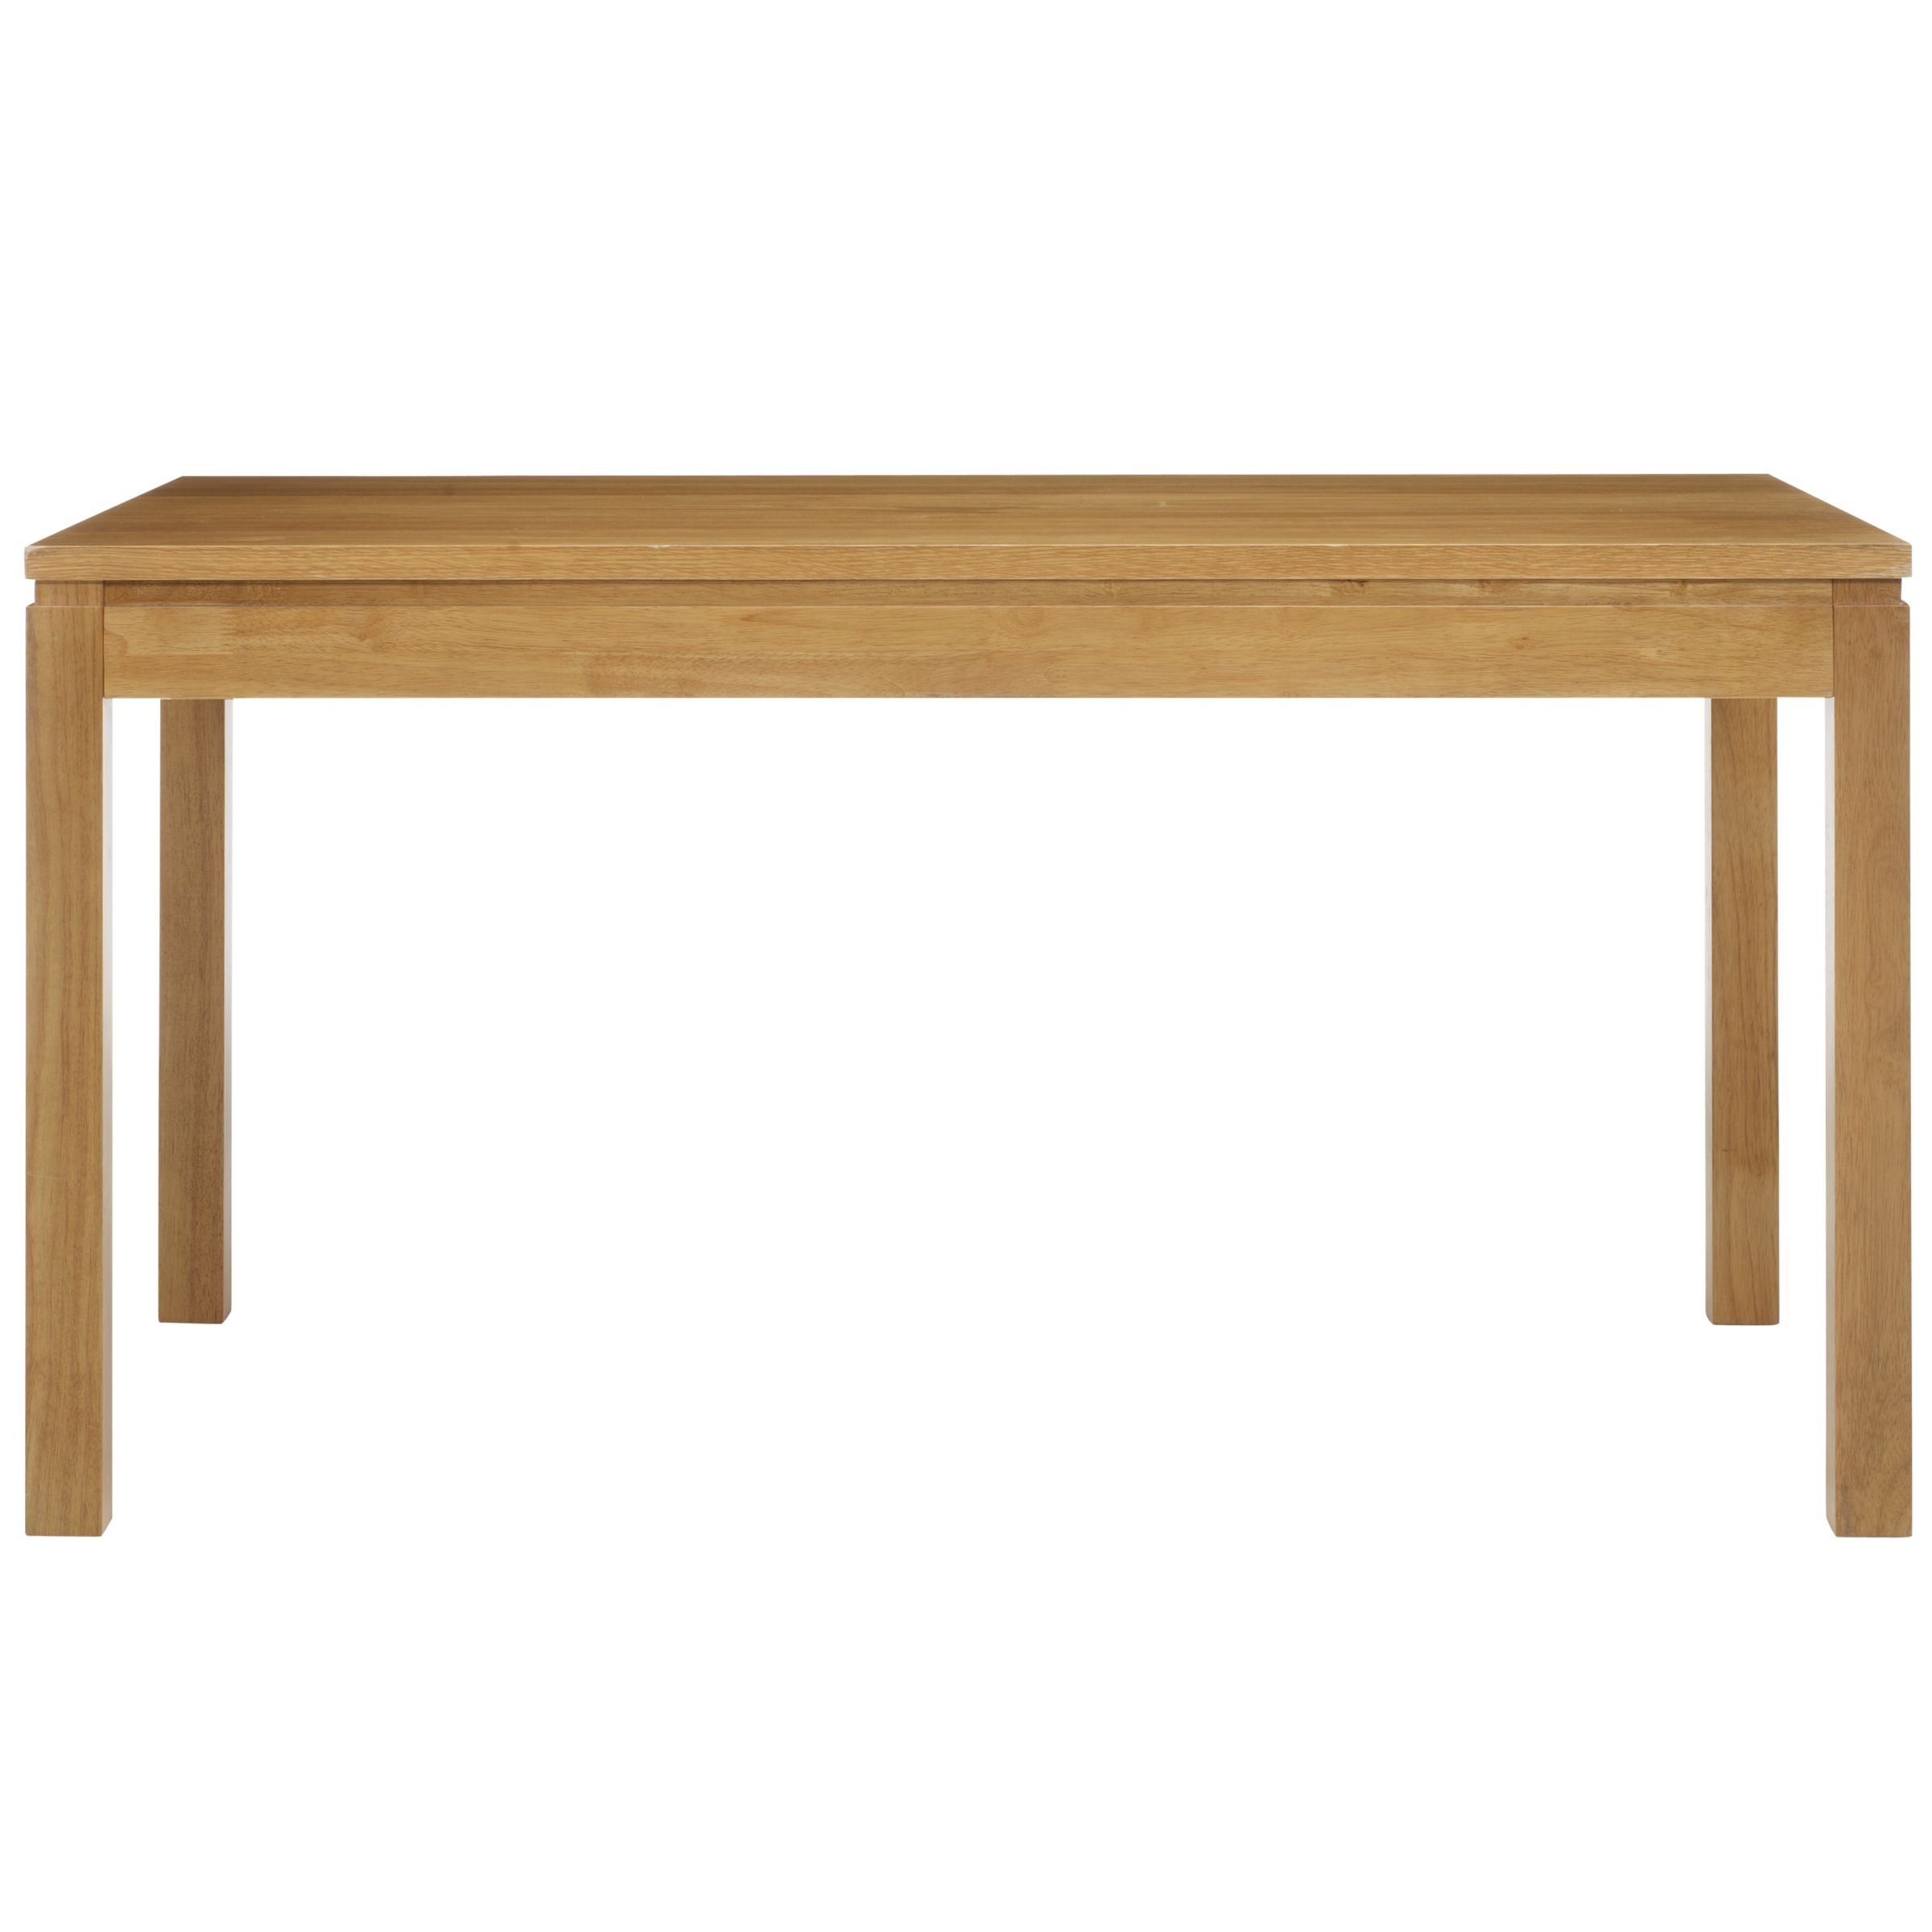 Hereford Dining Table, Light at John Lewis